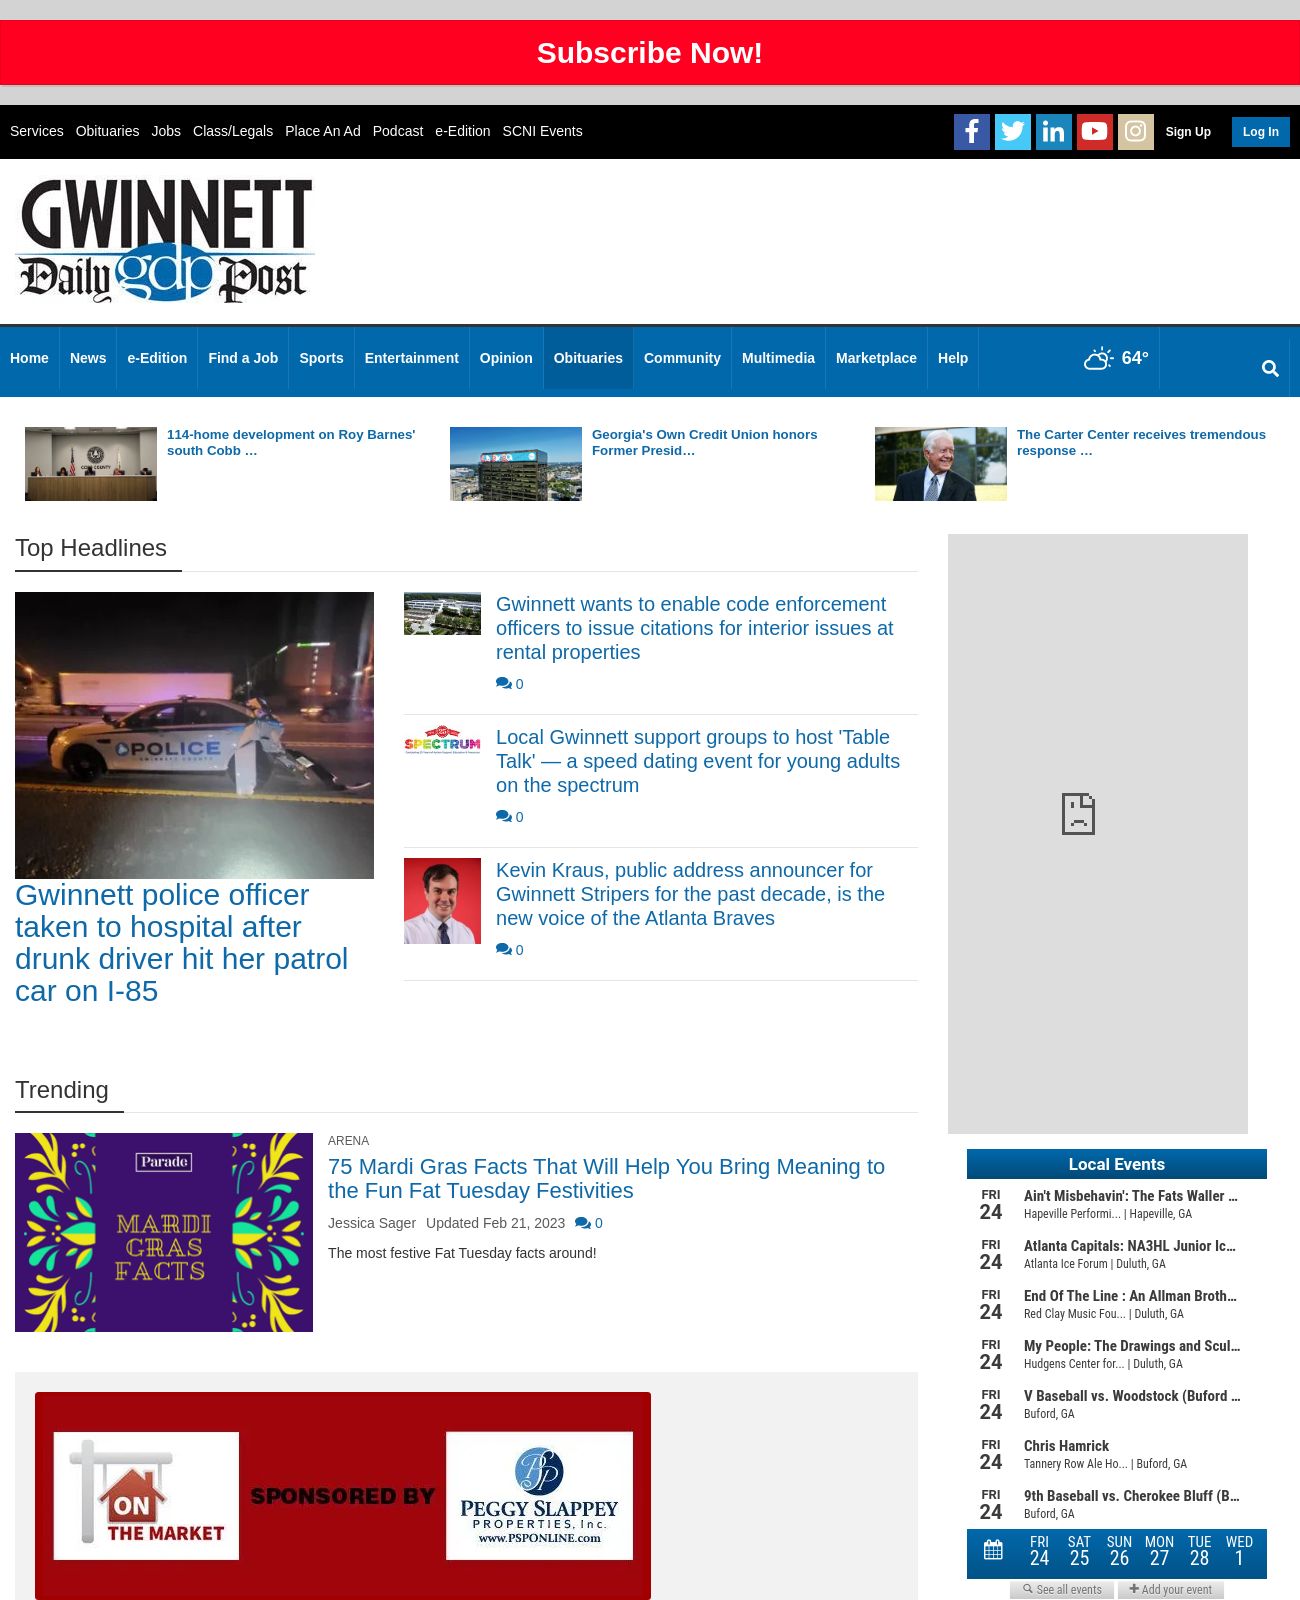 Gwinnett Daily Post at 2023-02-24 17:58:02-05:00 local time